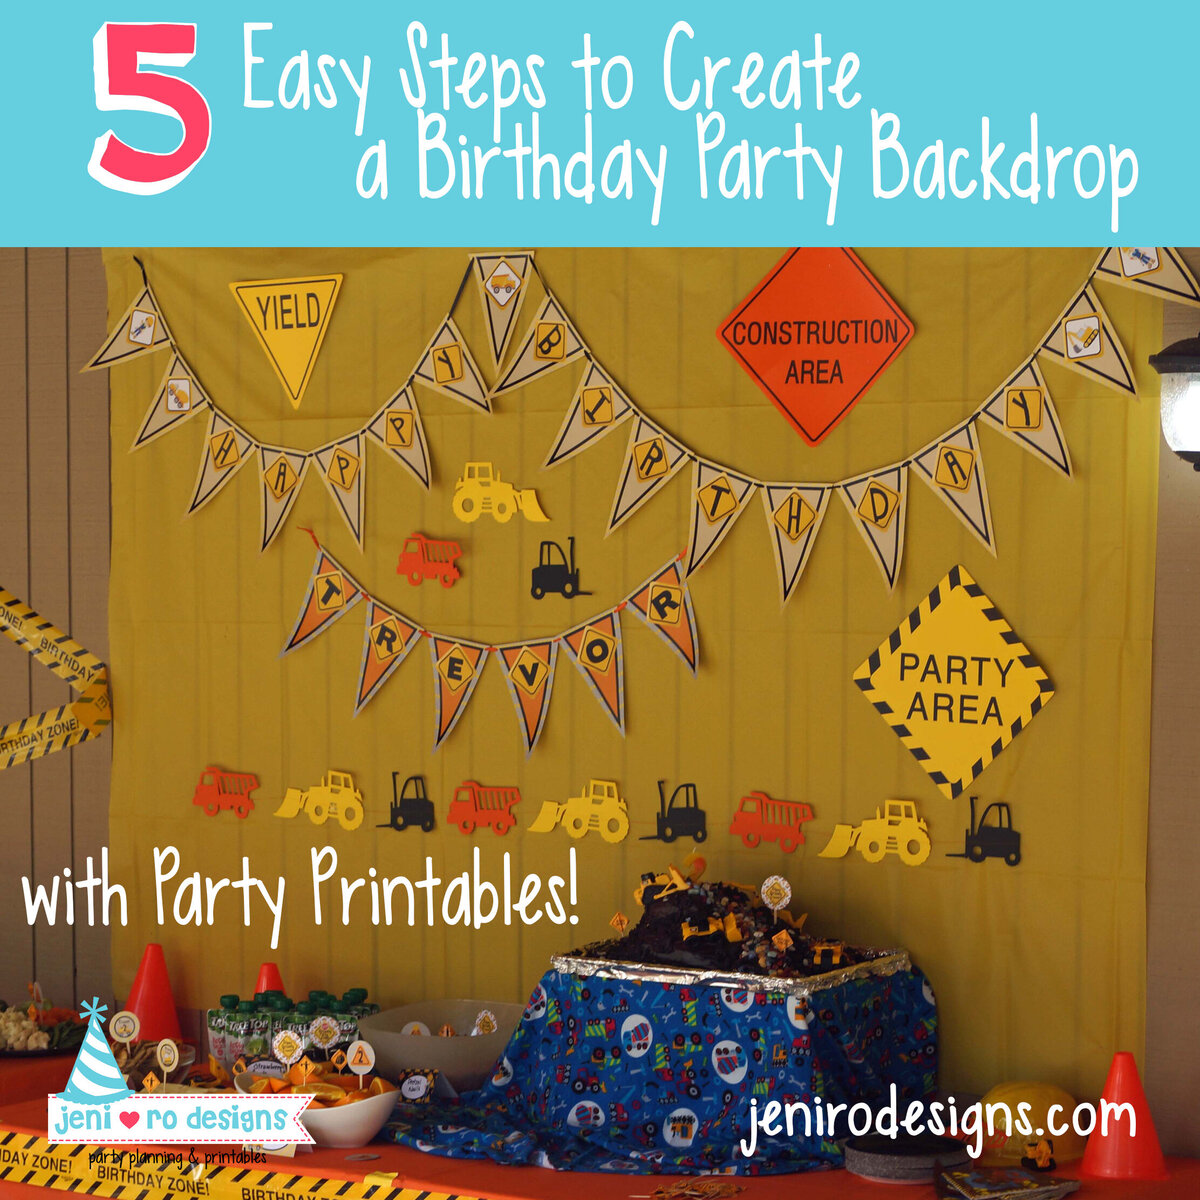 5 steps to create a party backdrop